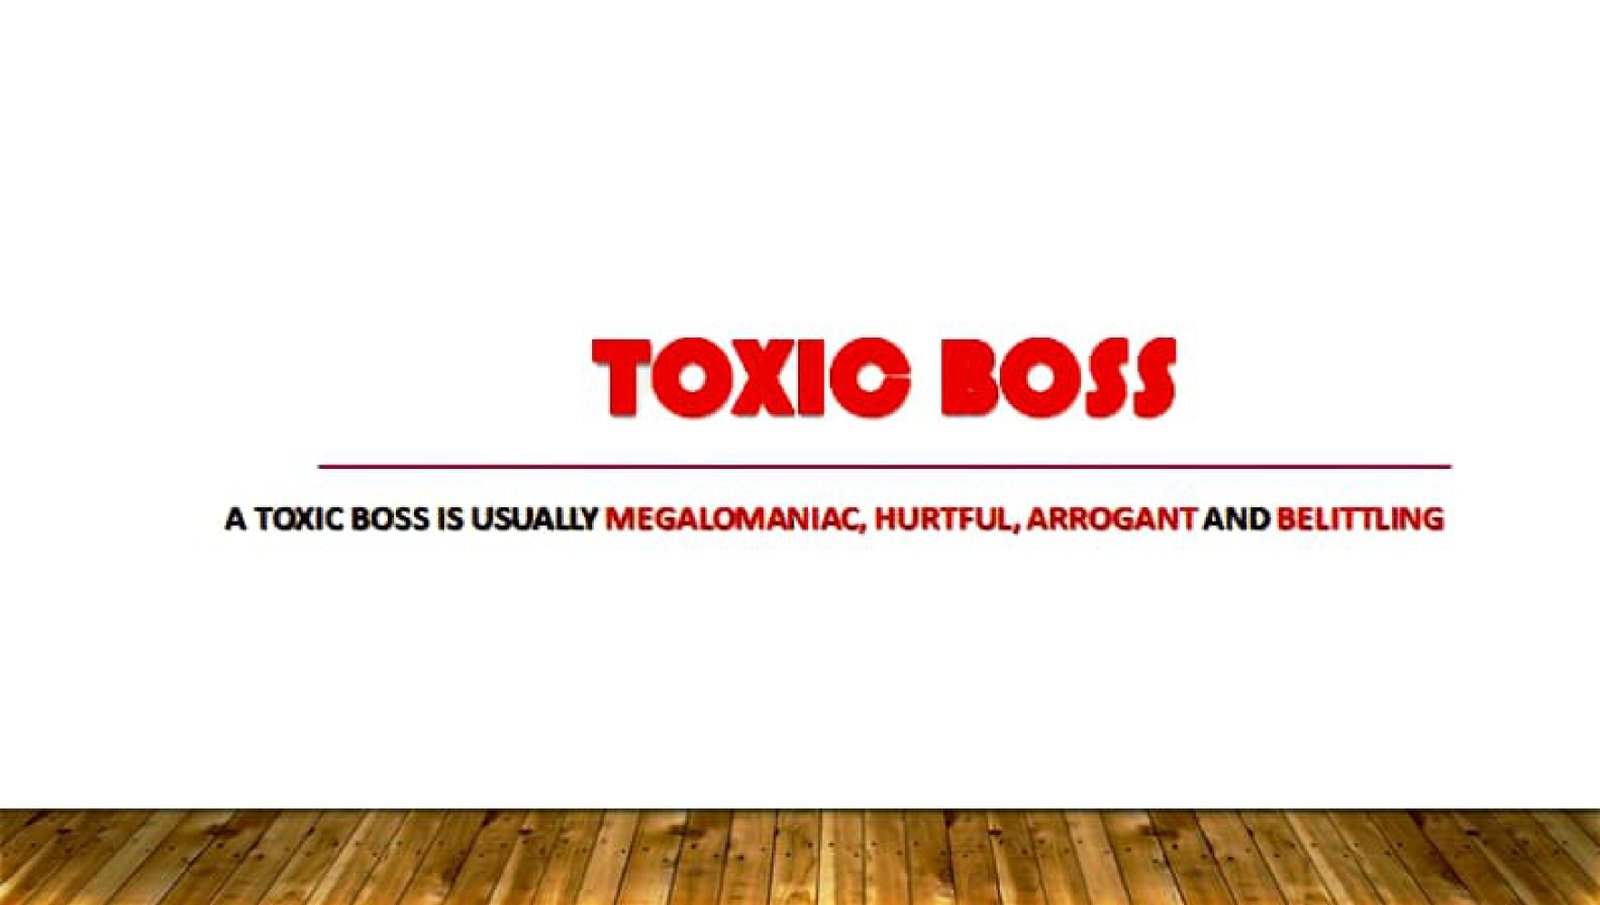 Why Toxic Boss is Megalomaniac?